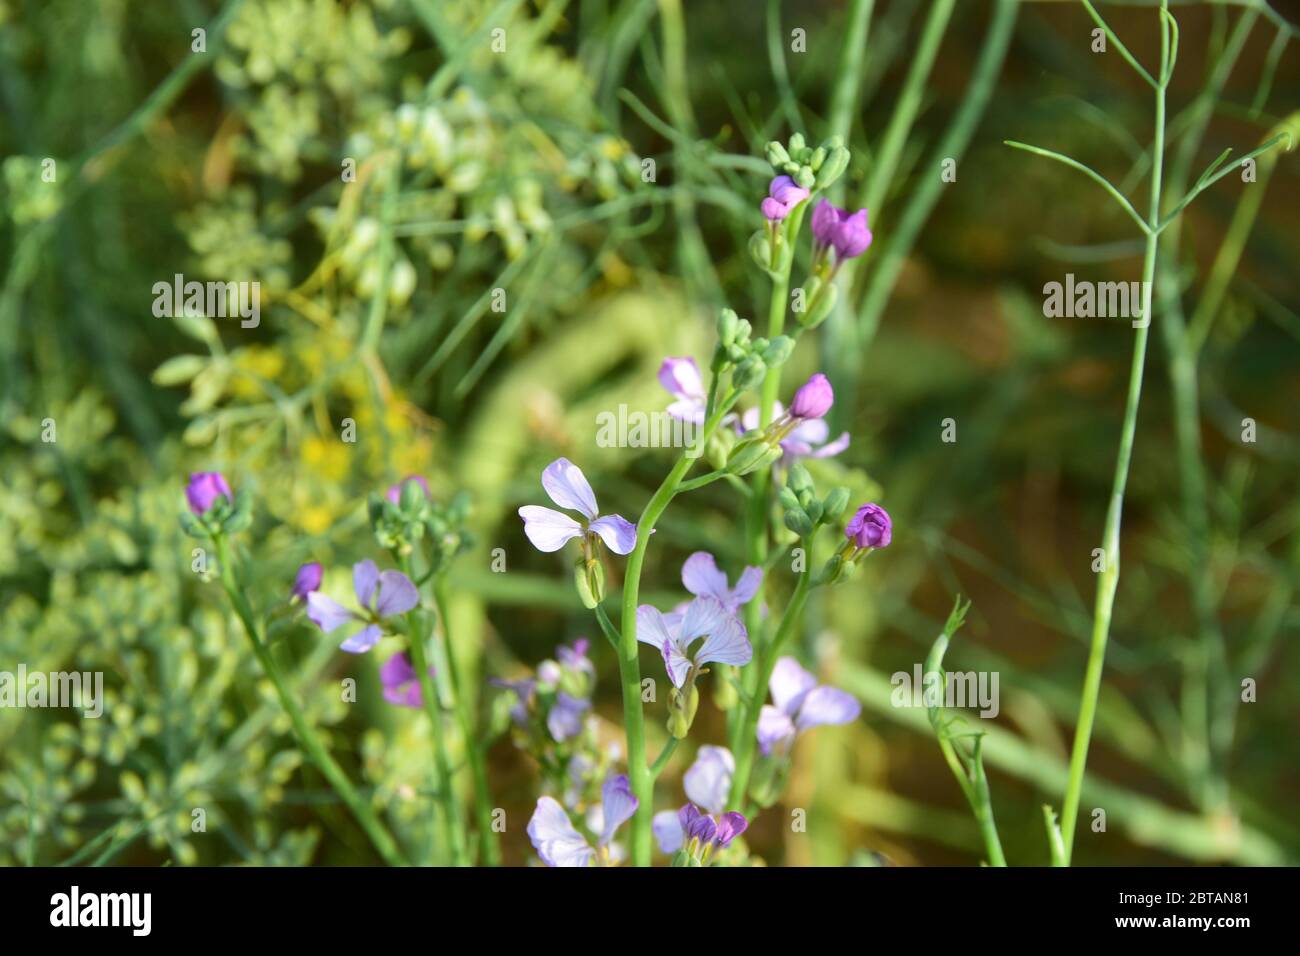 View of fennel plant flower in the garden Stock Photo